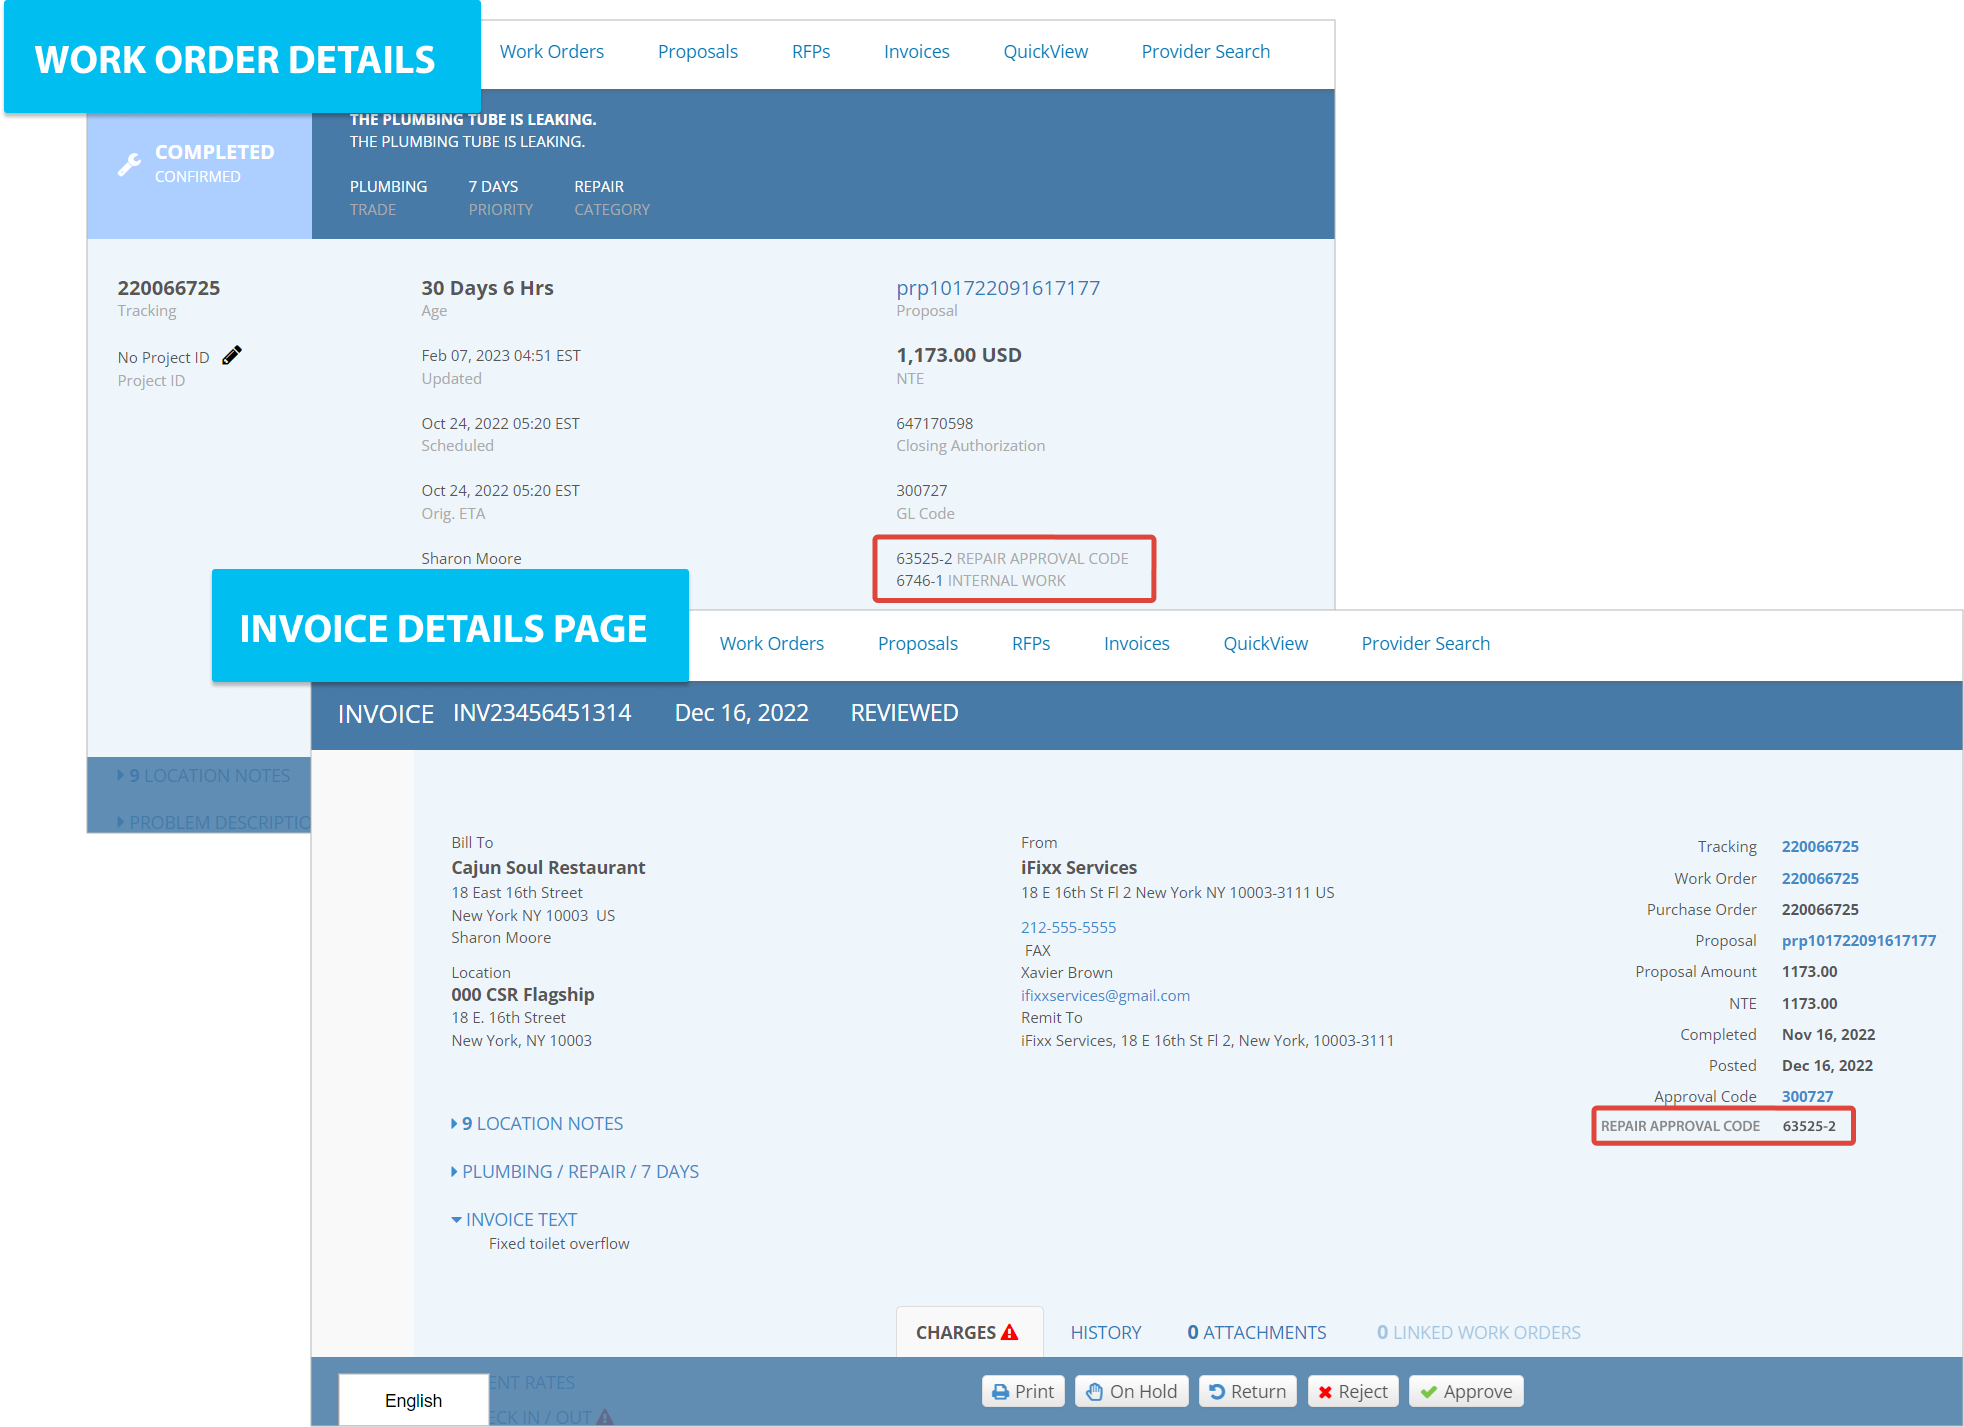 Screenshot showing the place of additional approval codes on the work order and invoice details pages